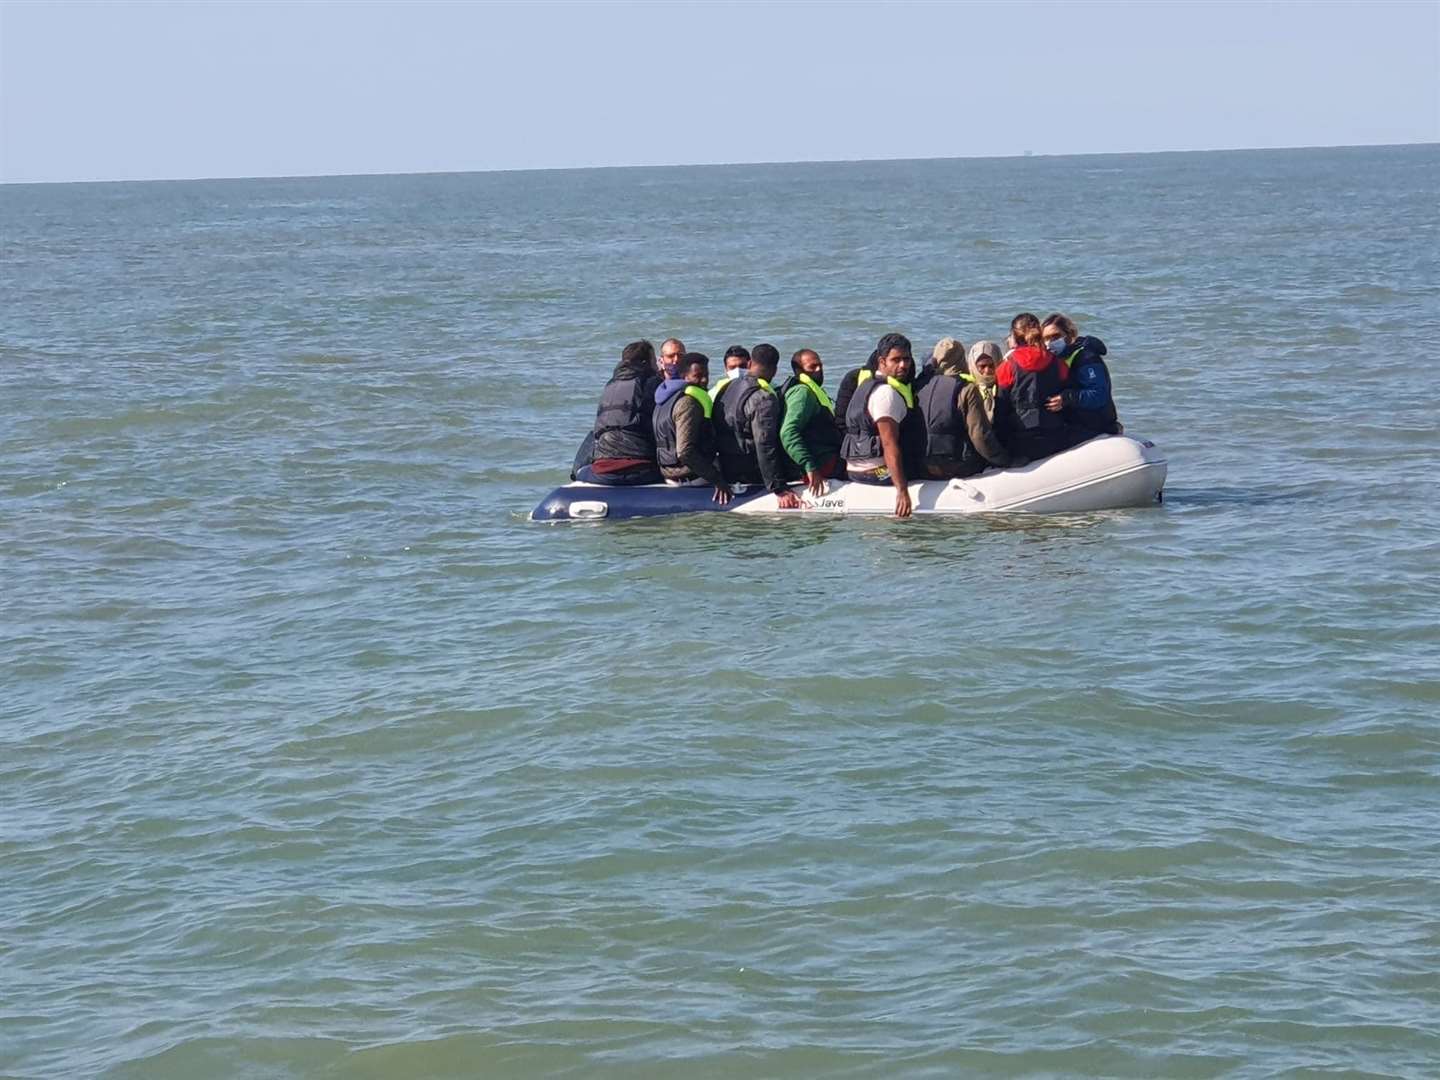 One overloaded vessel at sea carrying in excess of 13 people